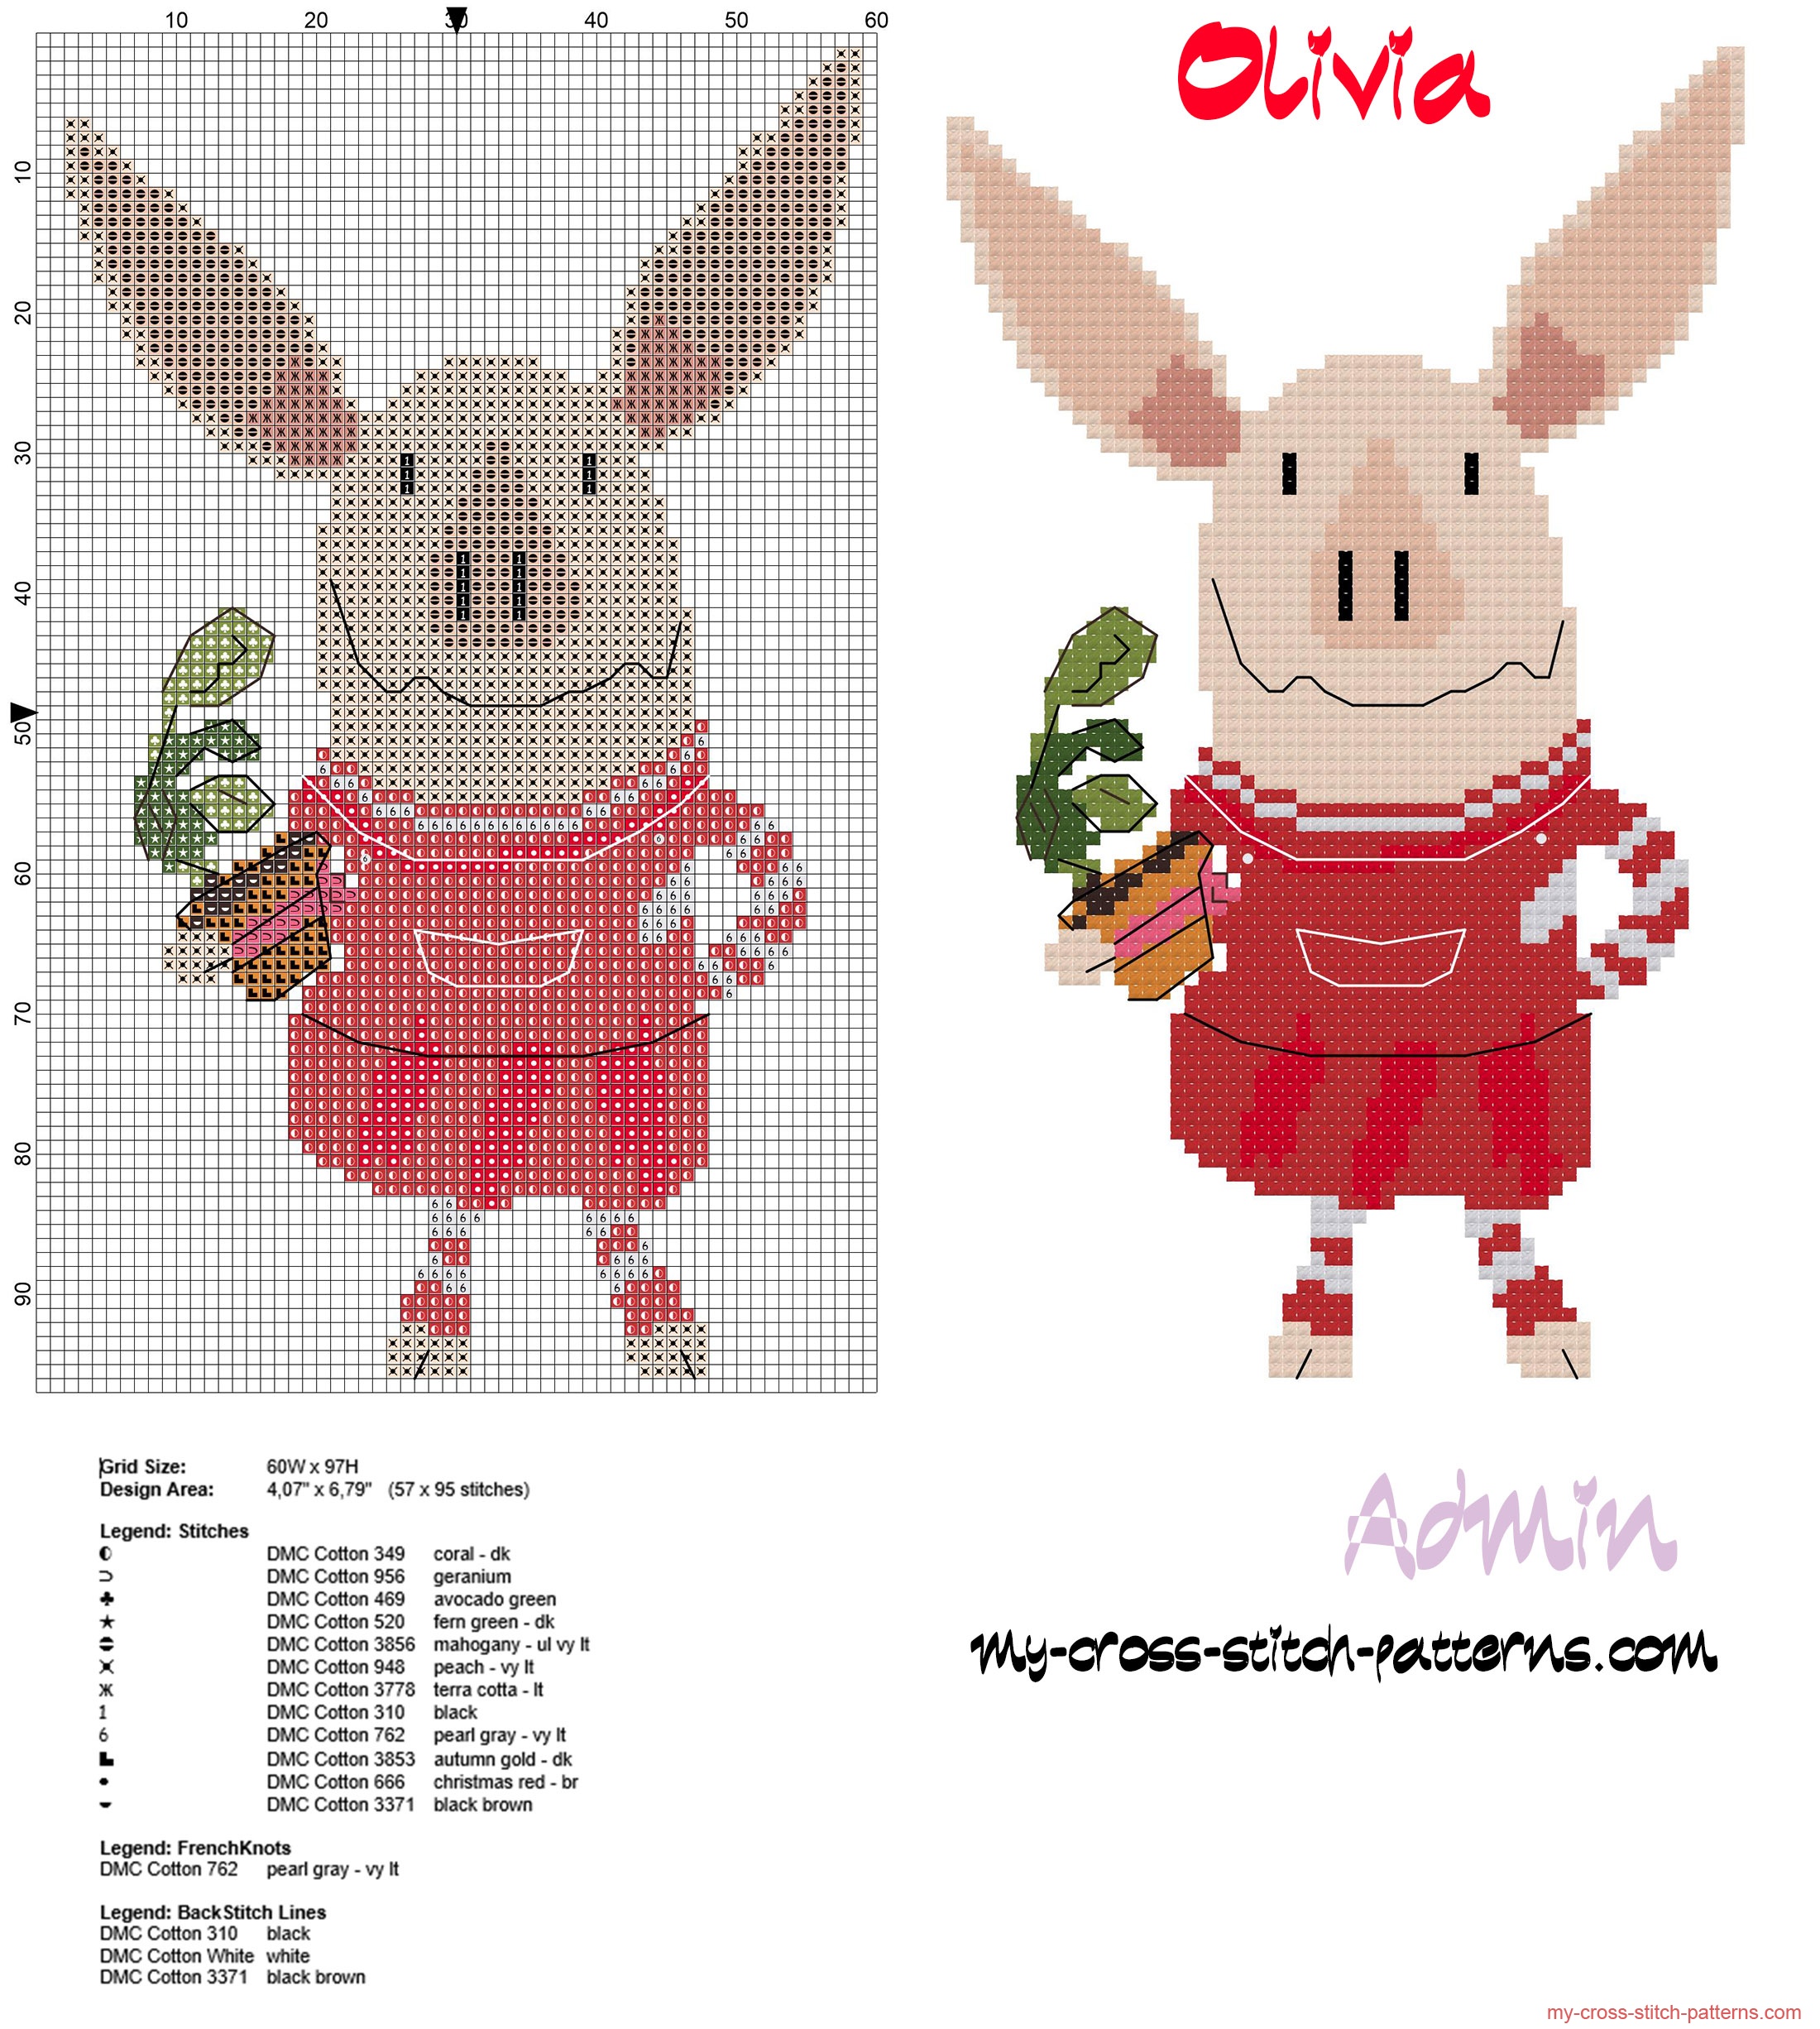 olivia_pig_cartoon_with_a_flowers_vase_free_cross_stitch_pattern_download